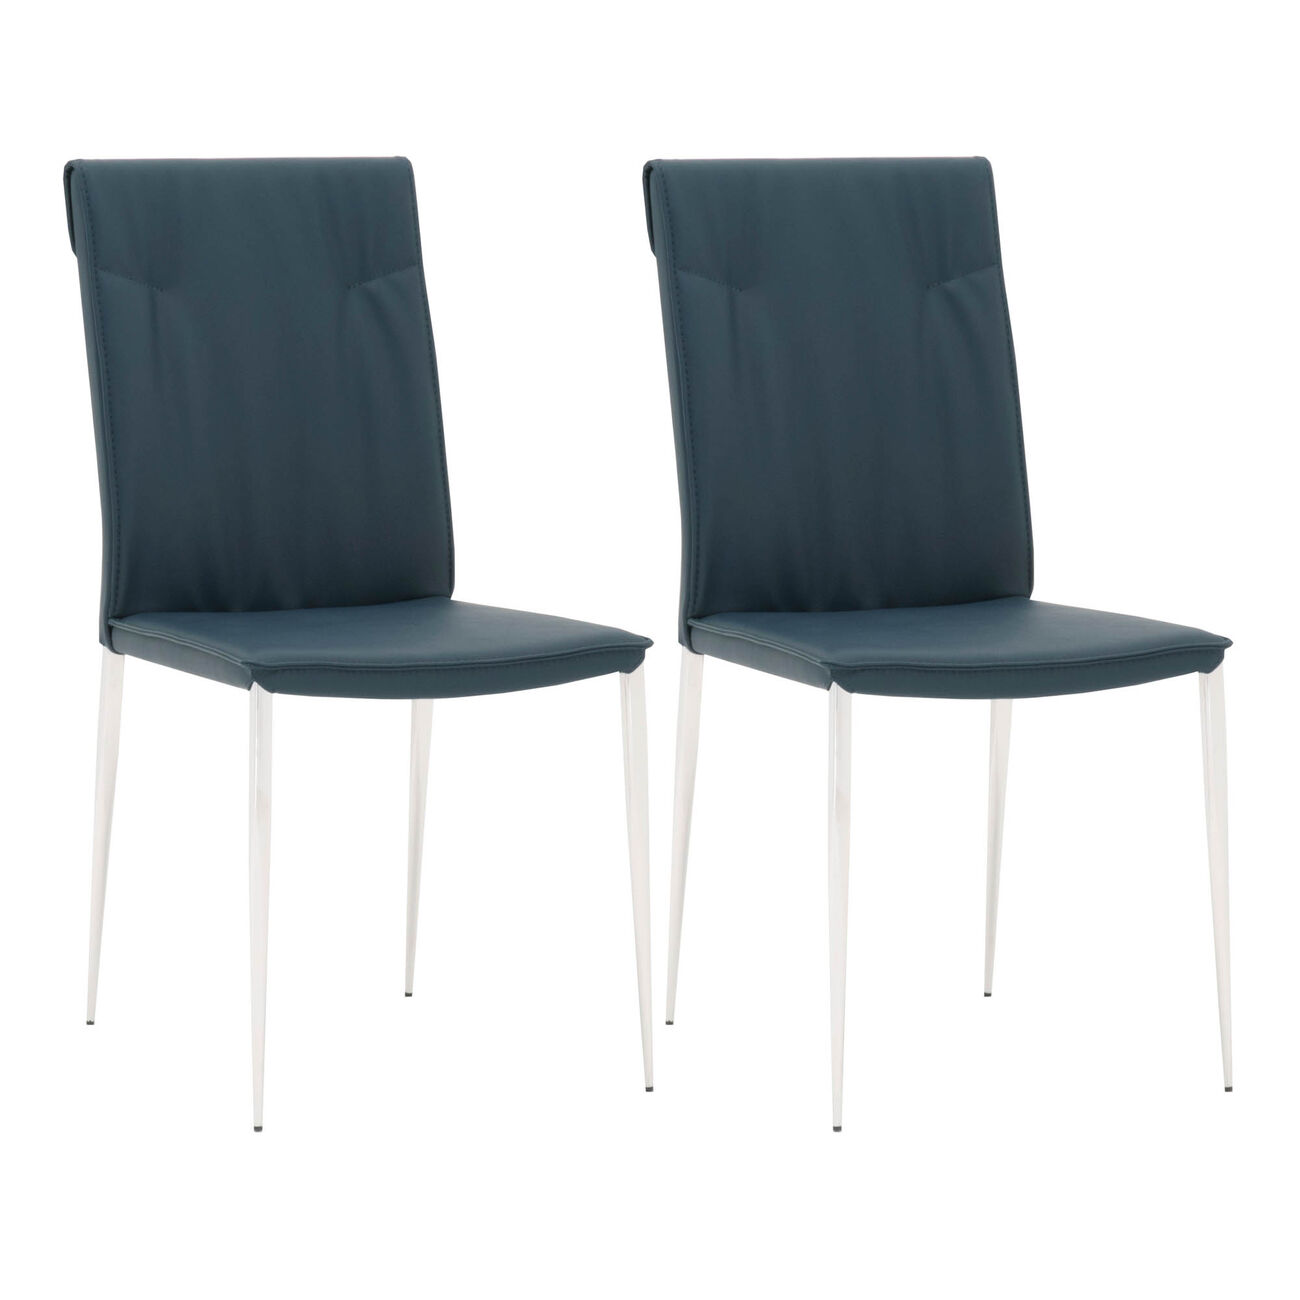 Leatherette Dining Chair with Slim Legs and Piped Edges, Set of 2,Navy Blue